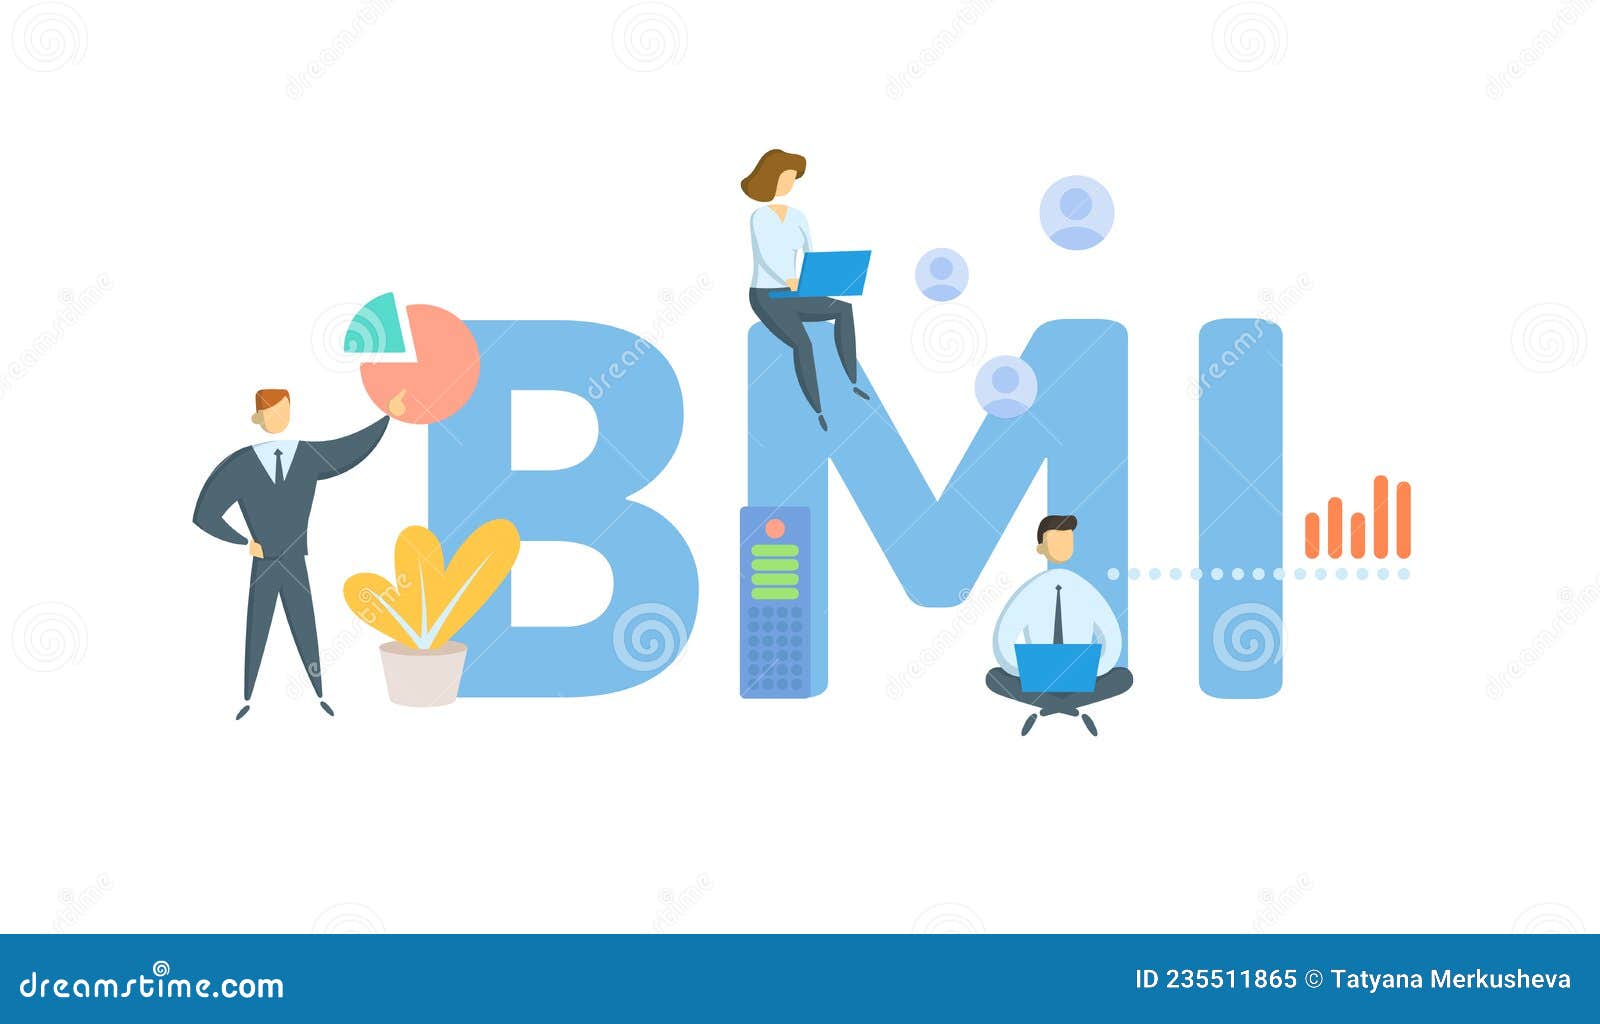 https://thumbs.dreamstime.com/z/bmi-body-mass-index-concept-keyword-people-icons-flat-vector-illustration-isolated-white-background-235511865.jpg